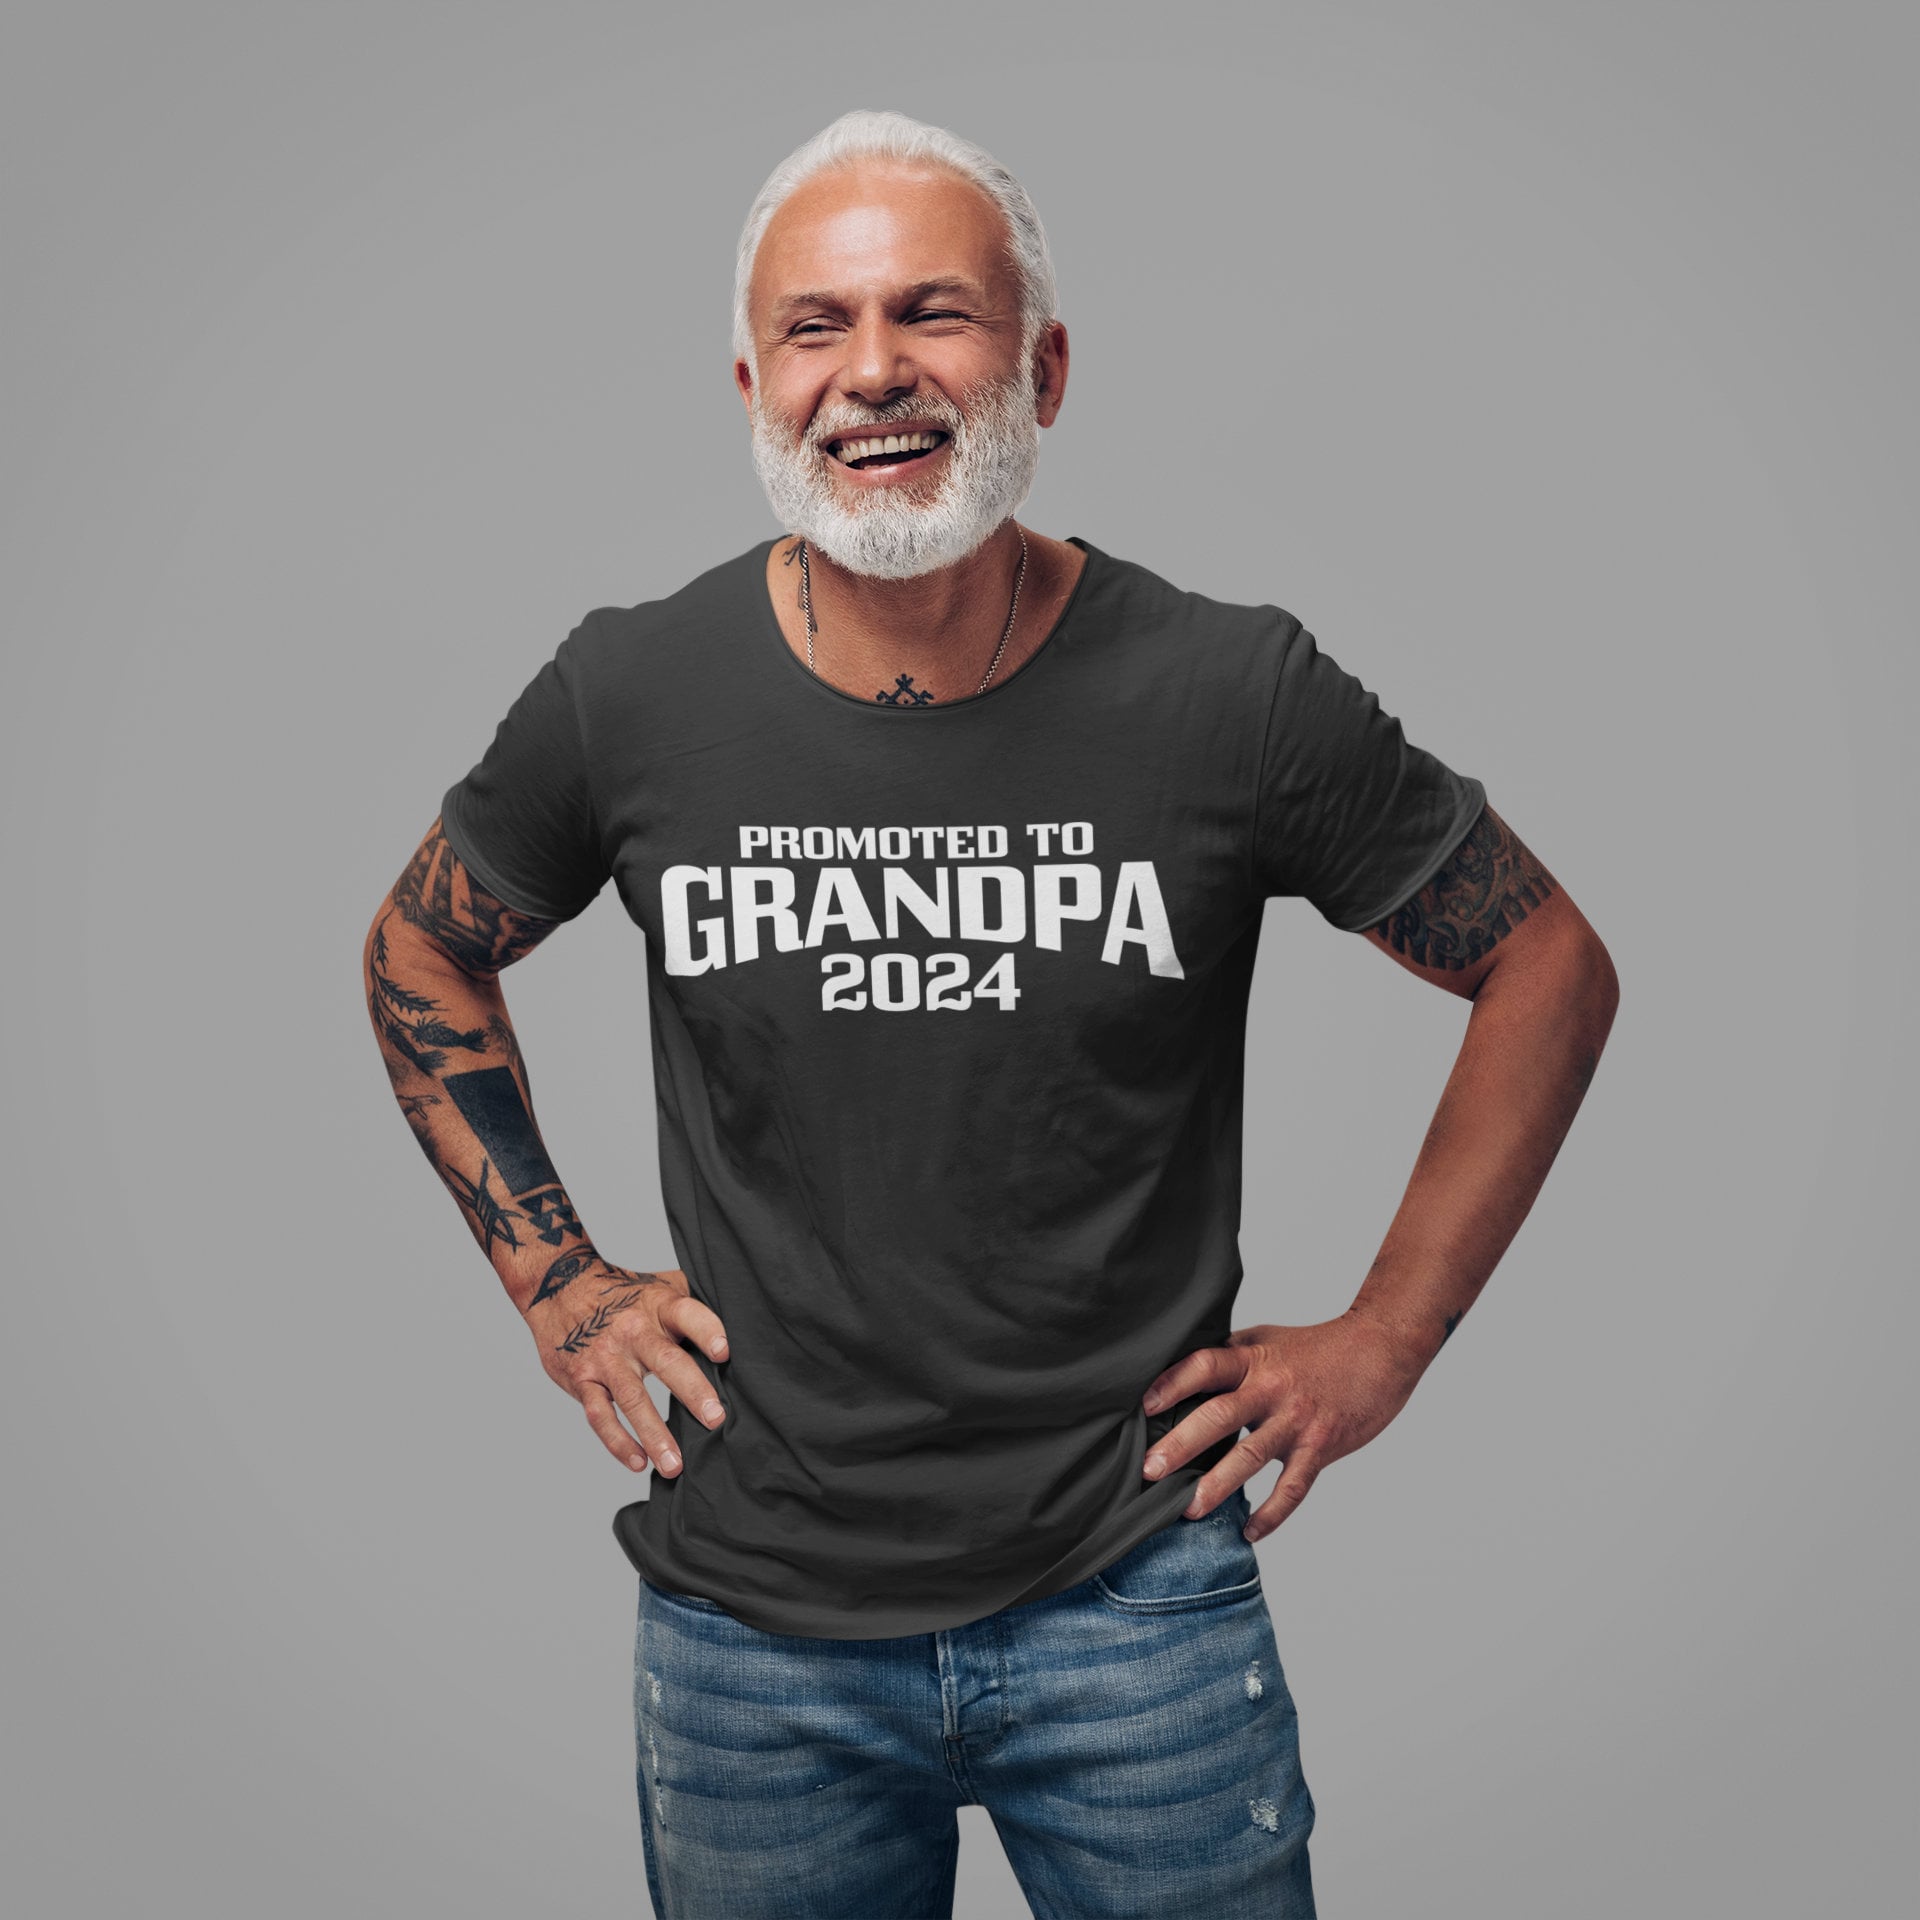 Promoted to Grandpa 2024 Shirt, New Grandpa, Fathers Day, Birthday, Christmas, Pregnancy Announcement gift, Soon to be Pappy, 1st Time Grand - SBS T Shop